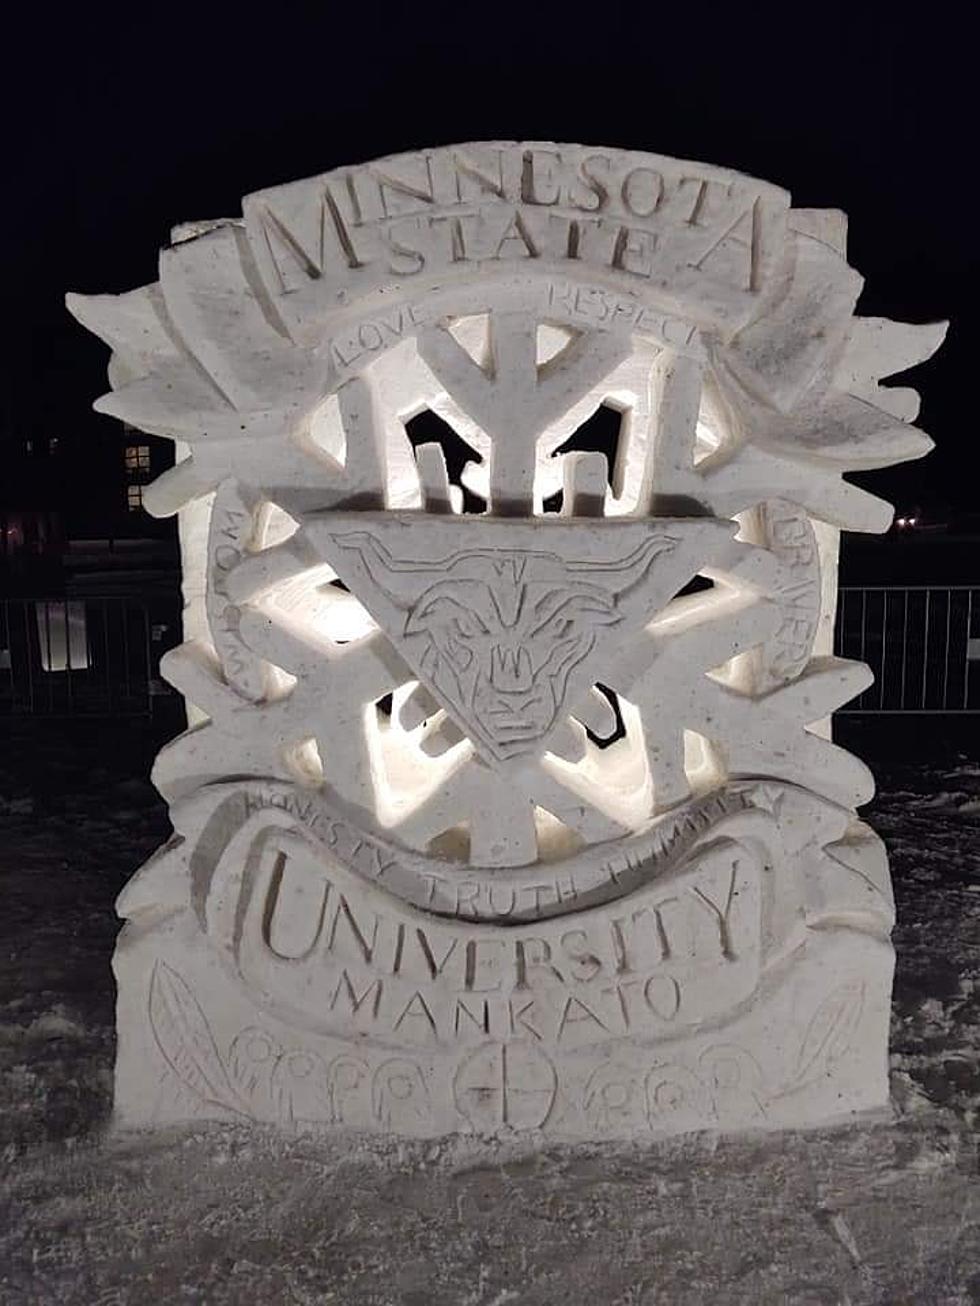 Have You Seen These Incredibly Detailed Snow Sculptures in Mankato?